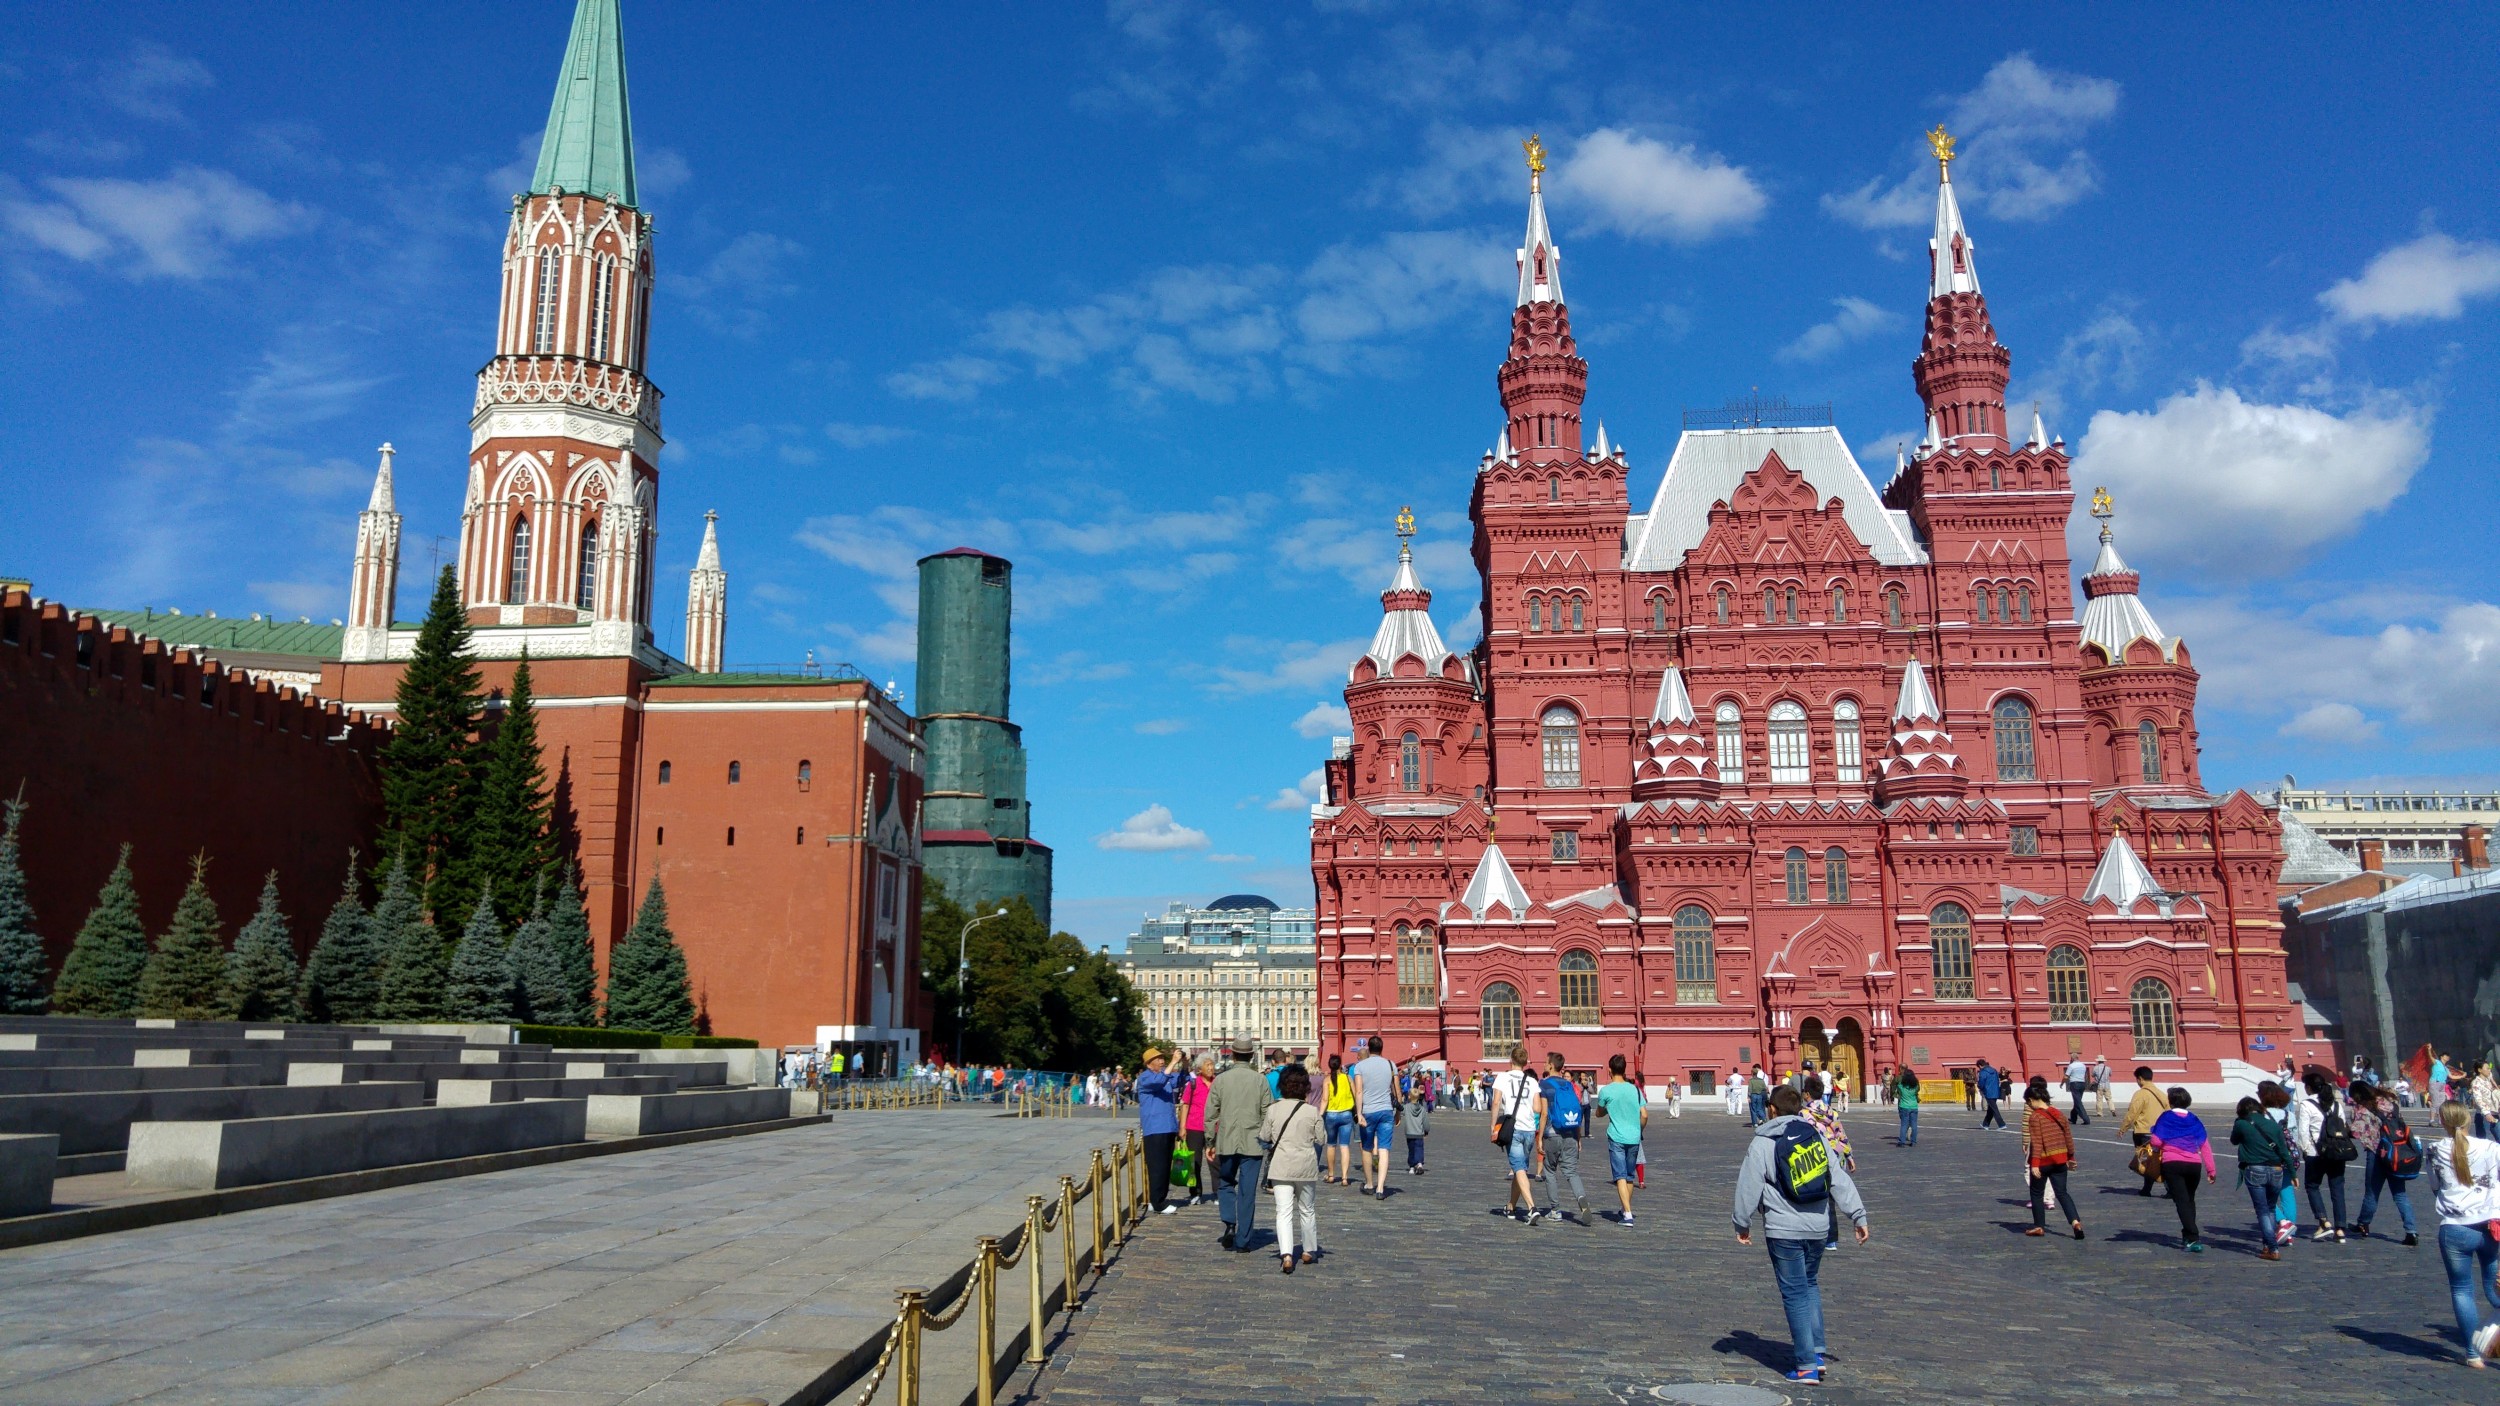 The Red Square : Moscow | Visions of Travel